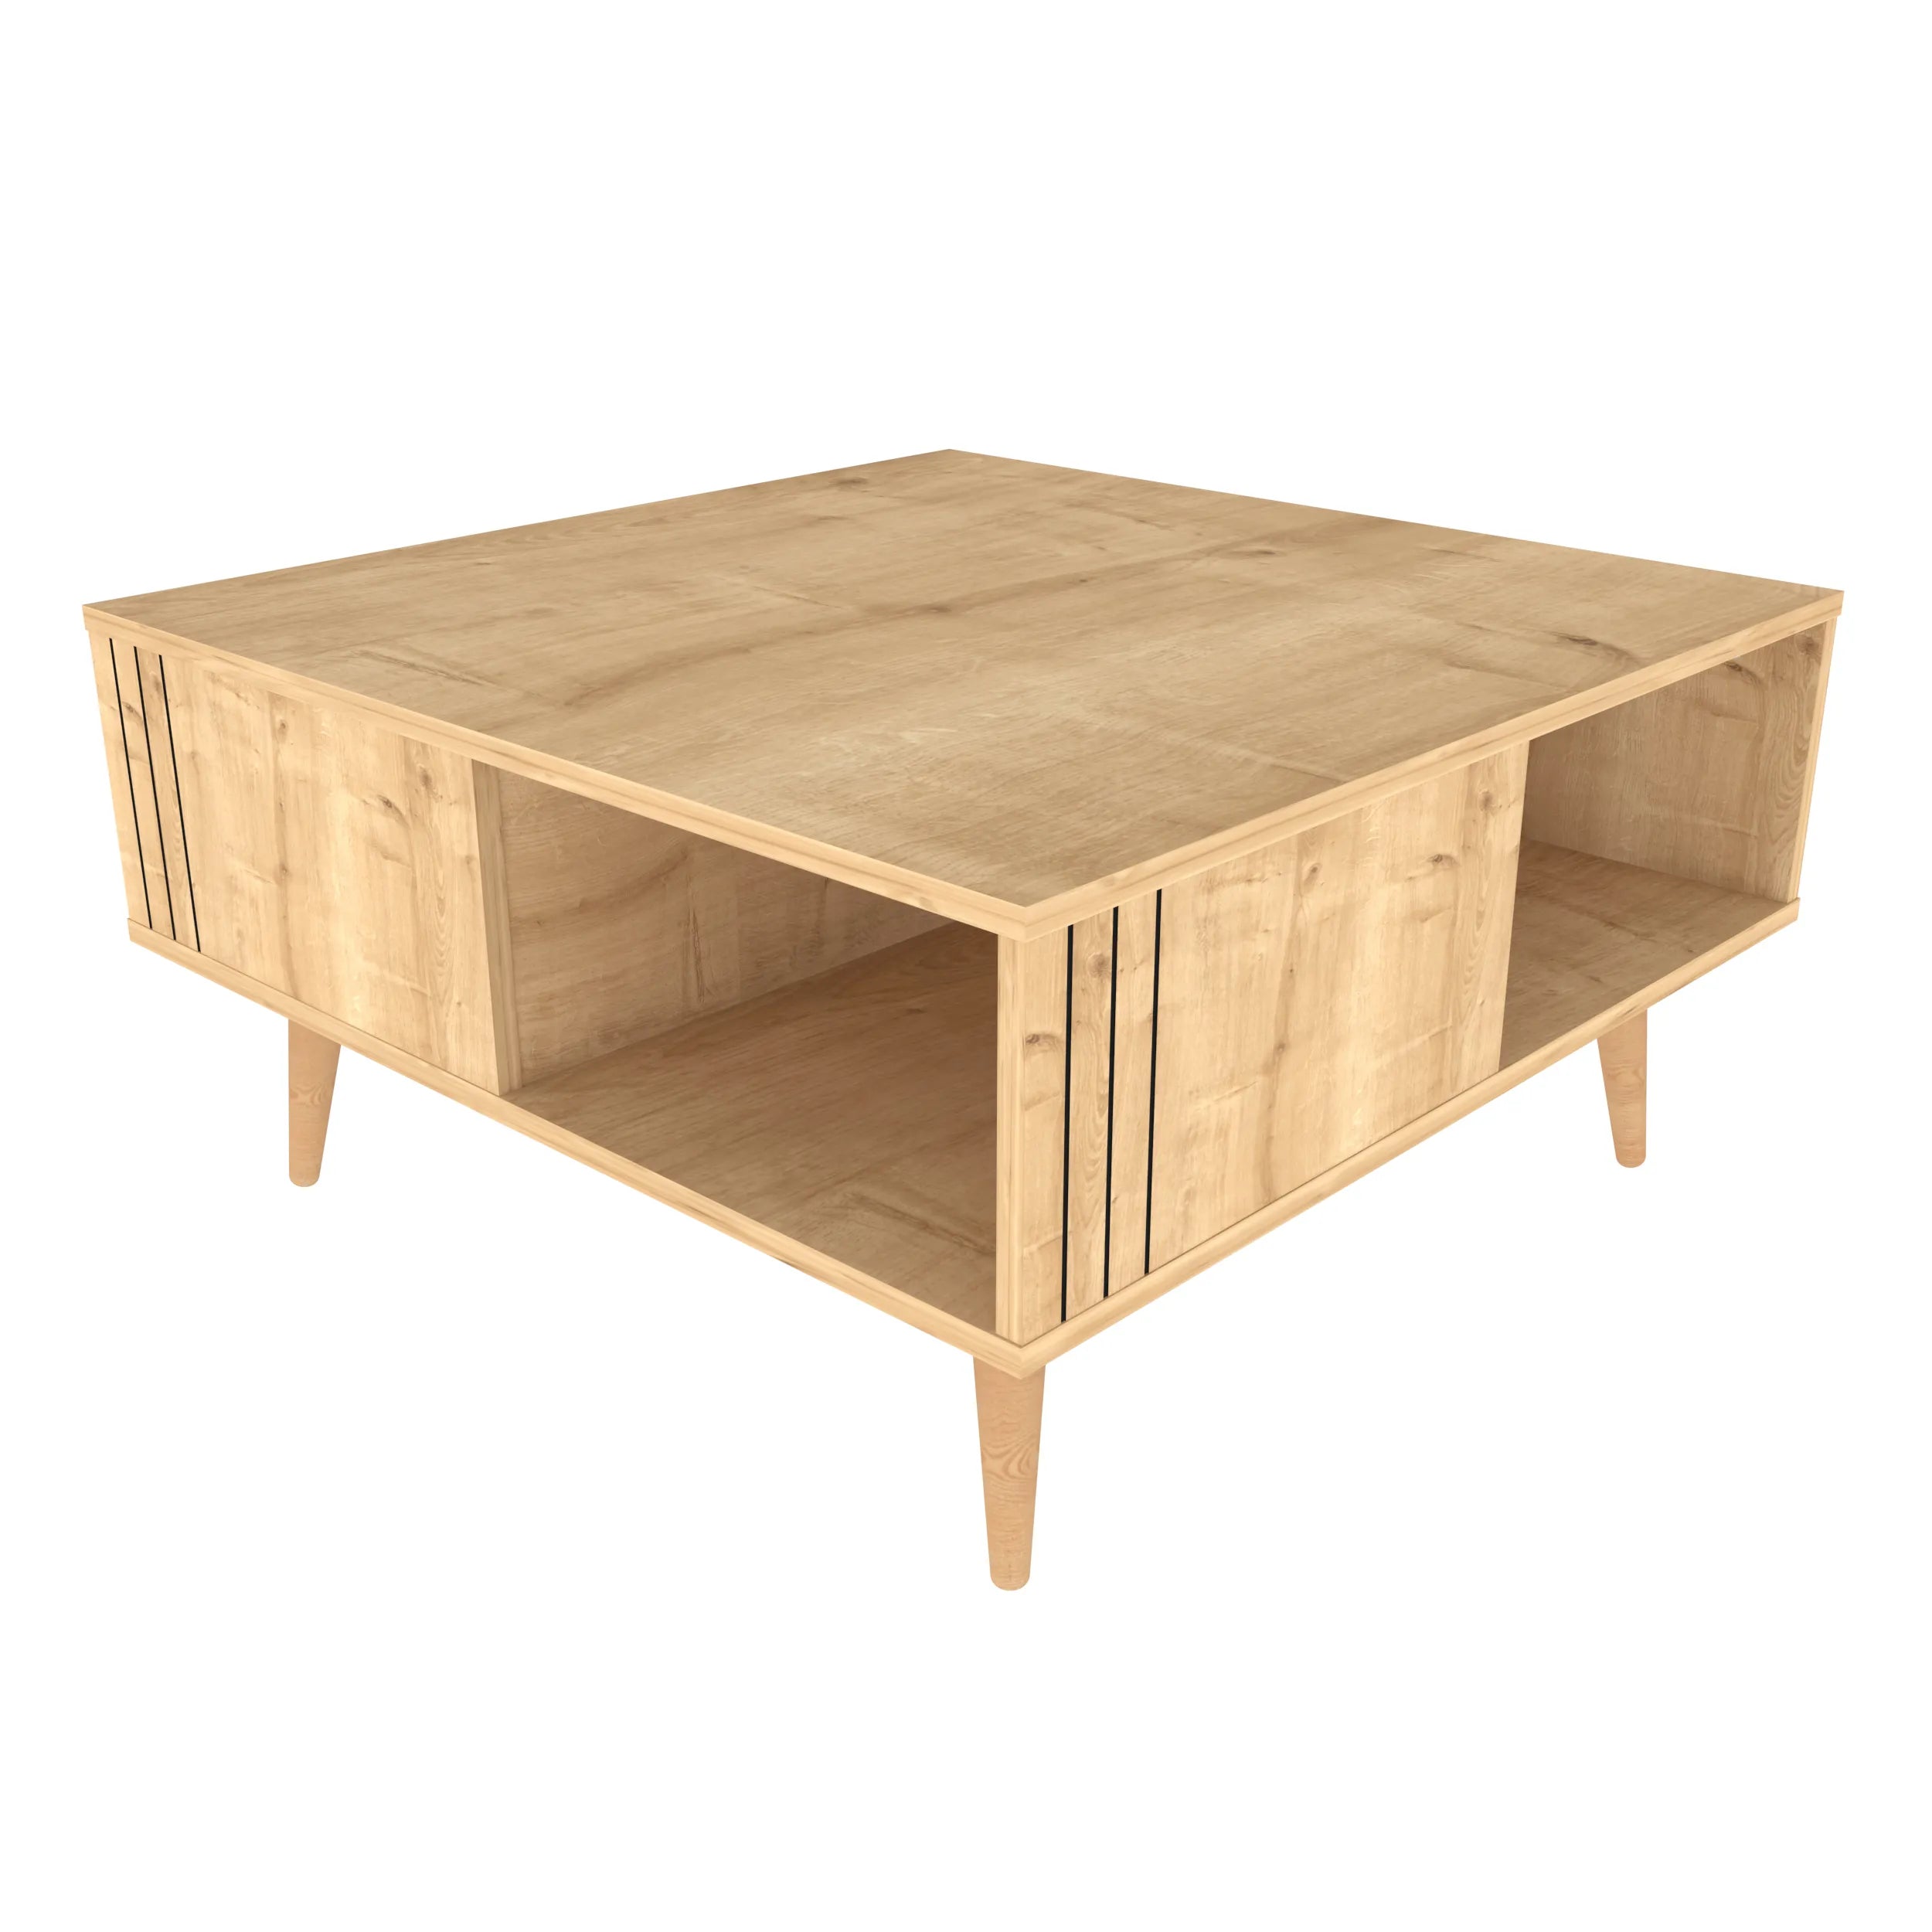 Ronas 35 inch Wide Square Coffee Table with Open Shelf Storage | Cocktail Table